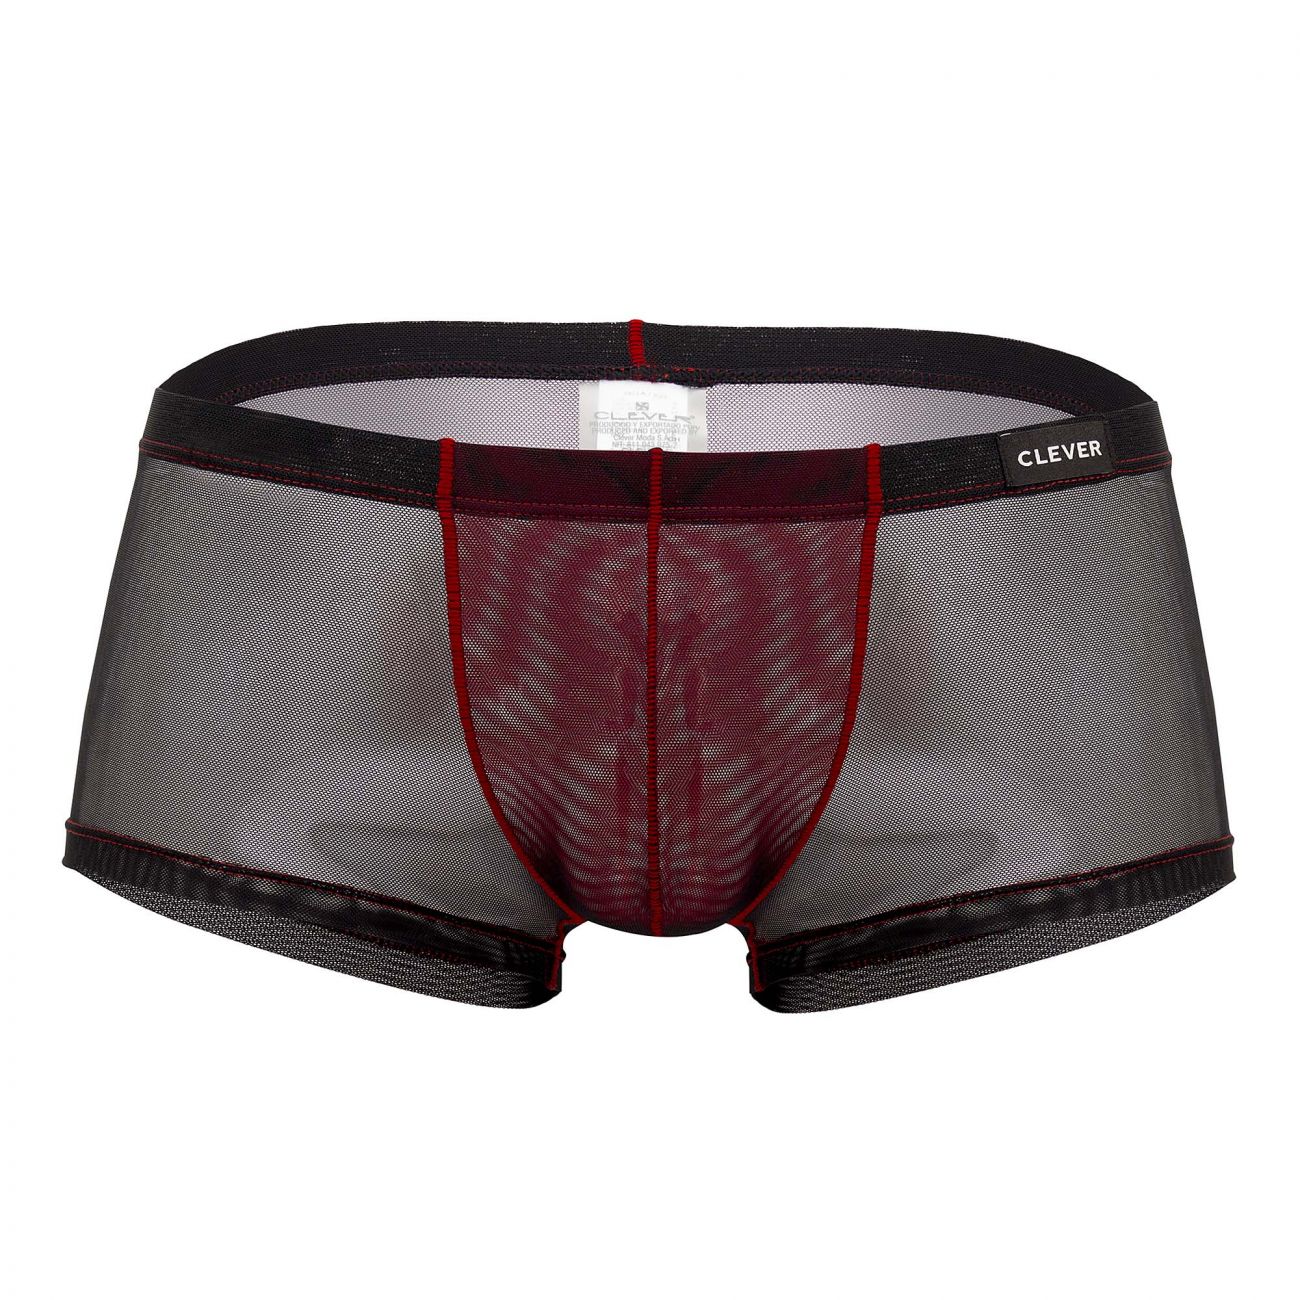 Clever 0406 Clarity Trunks Black